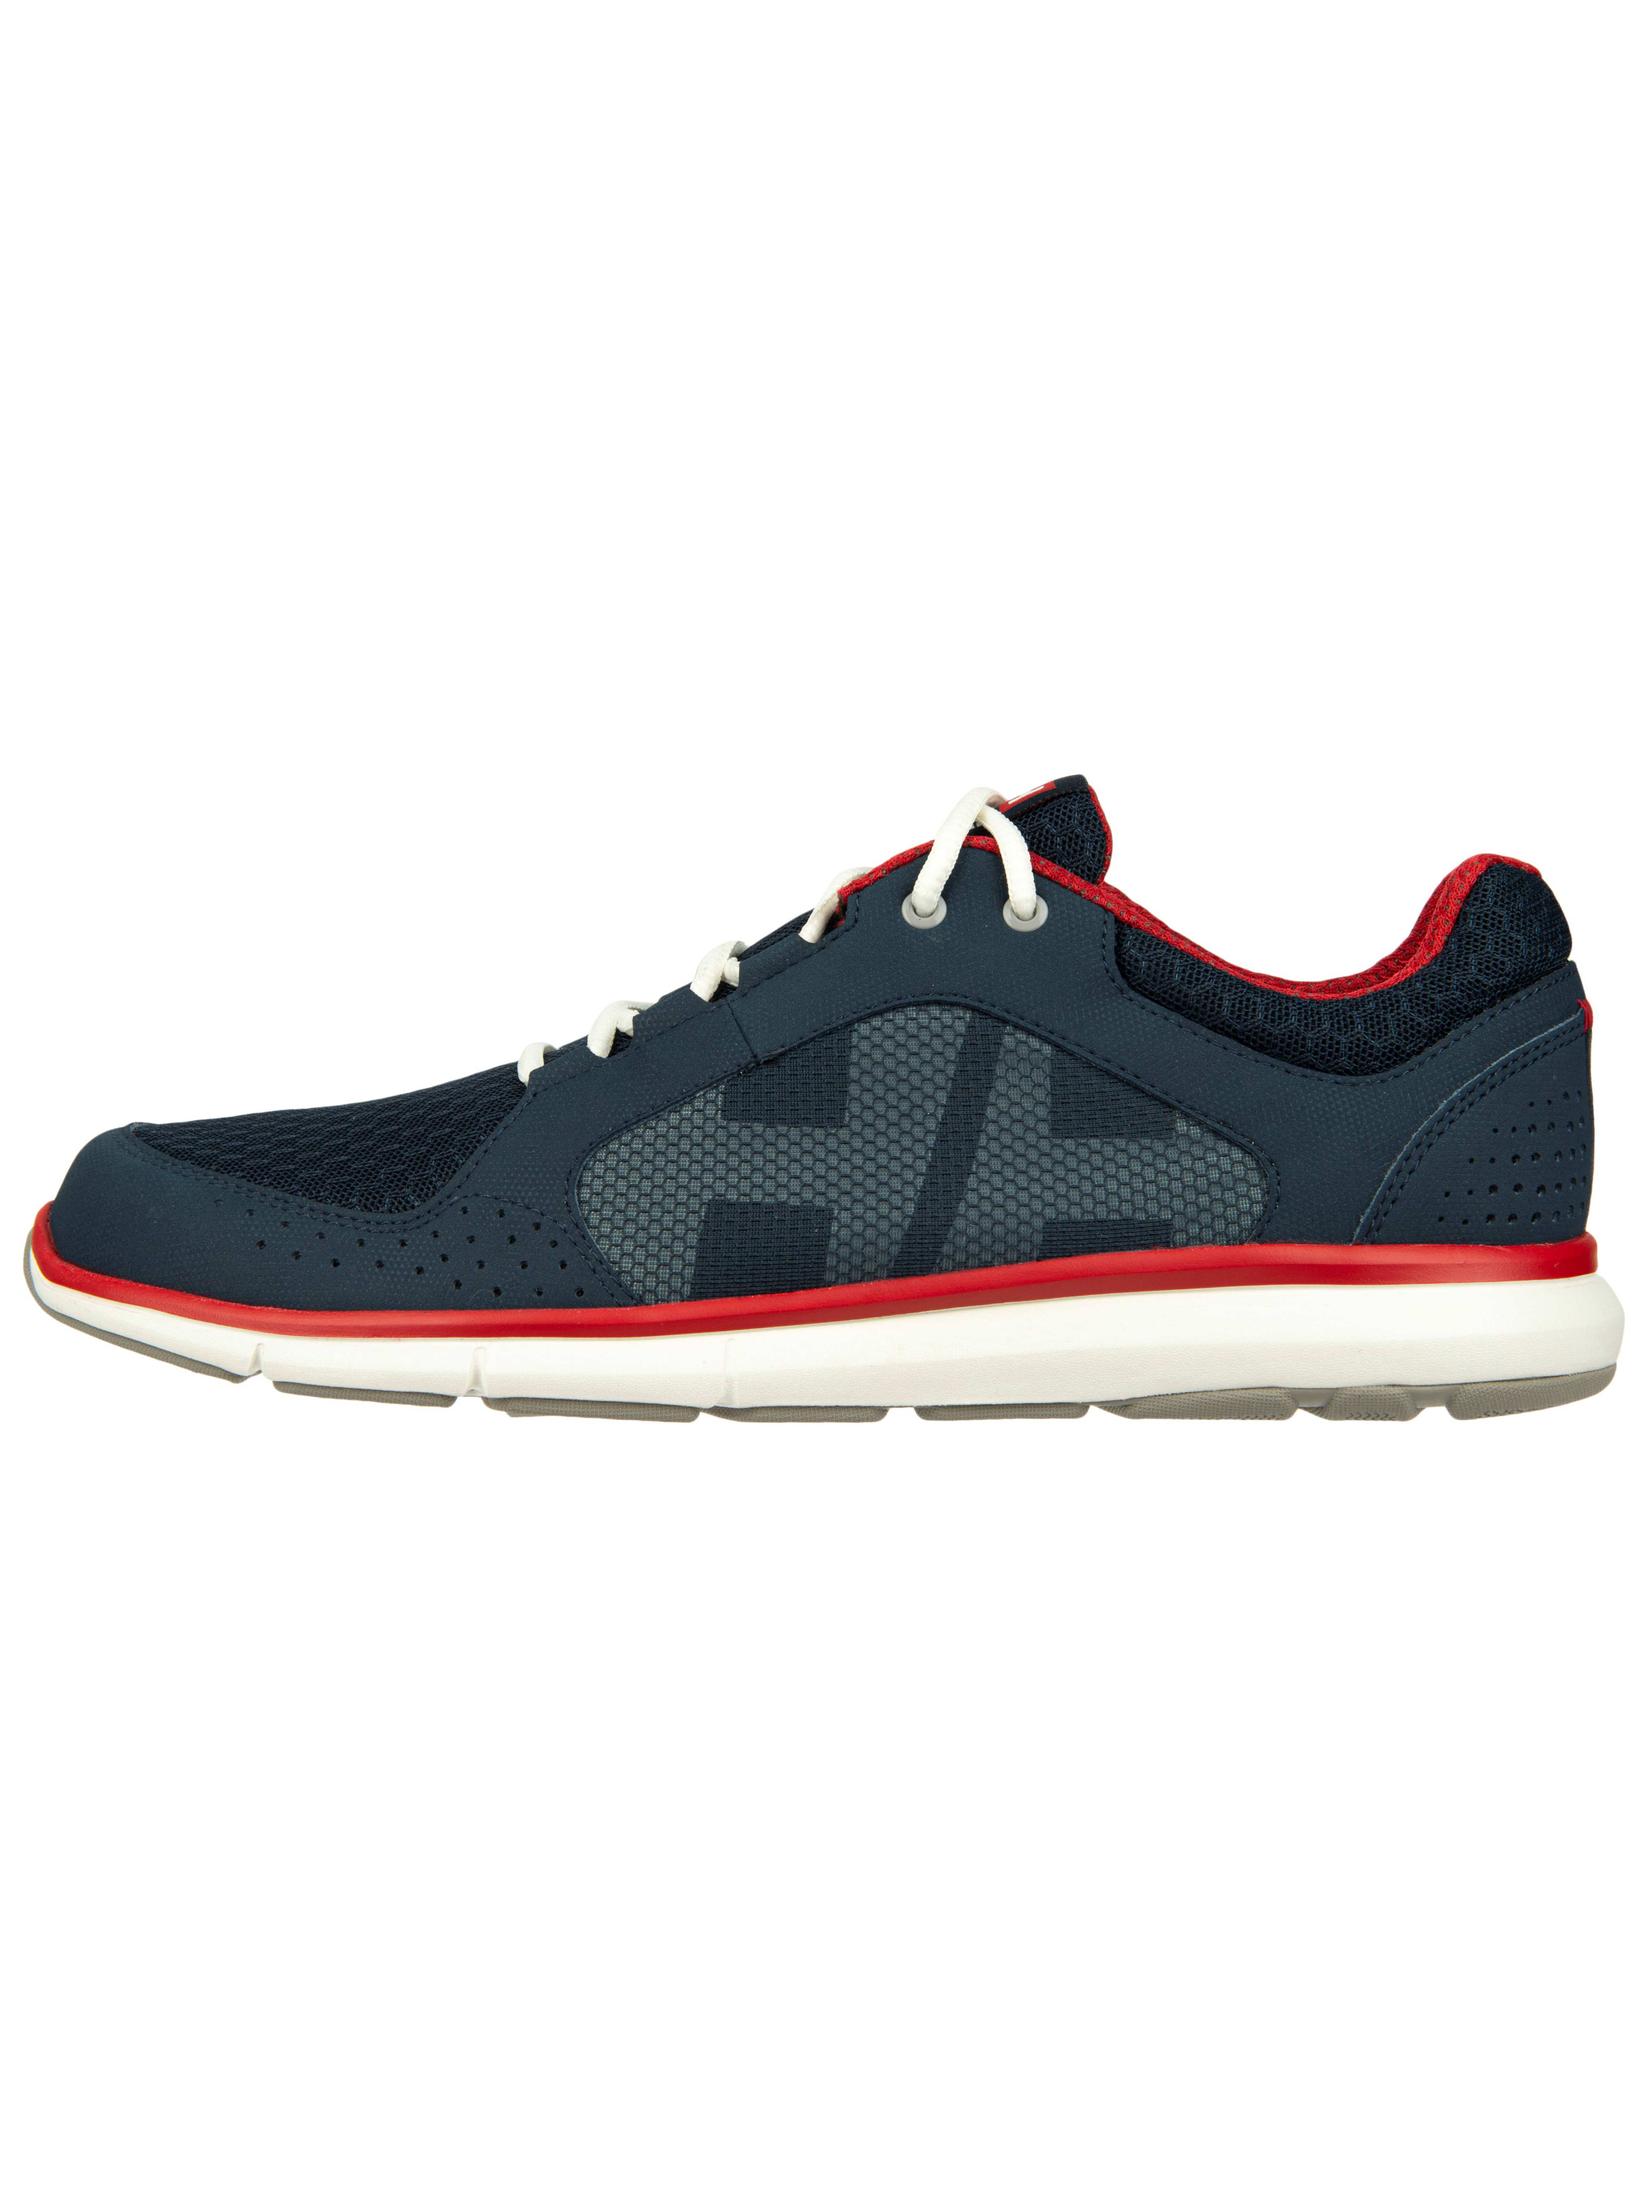 Selected image for HELLY HANSEN Muške patike AHIGA V4 HYDROPOWER Shoes teget